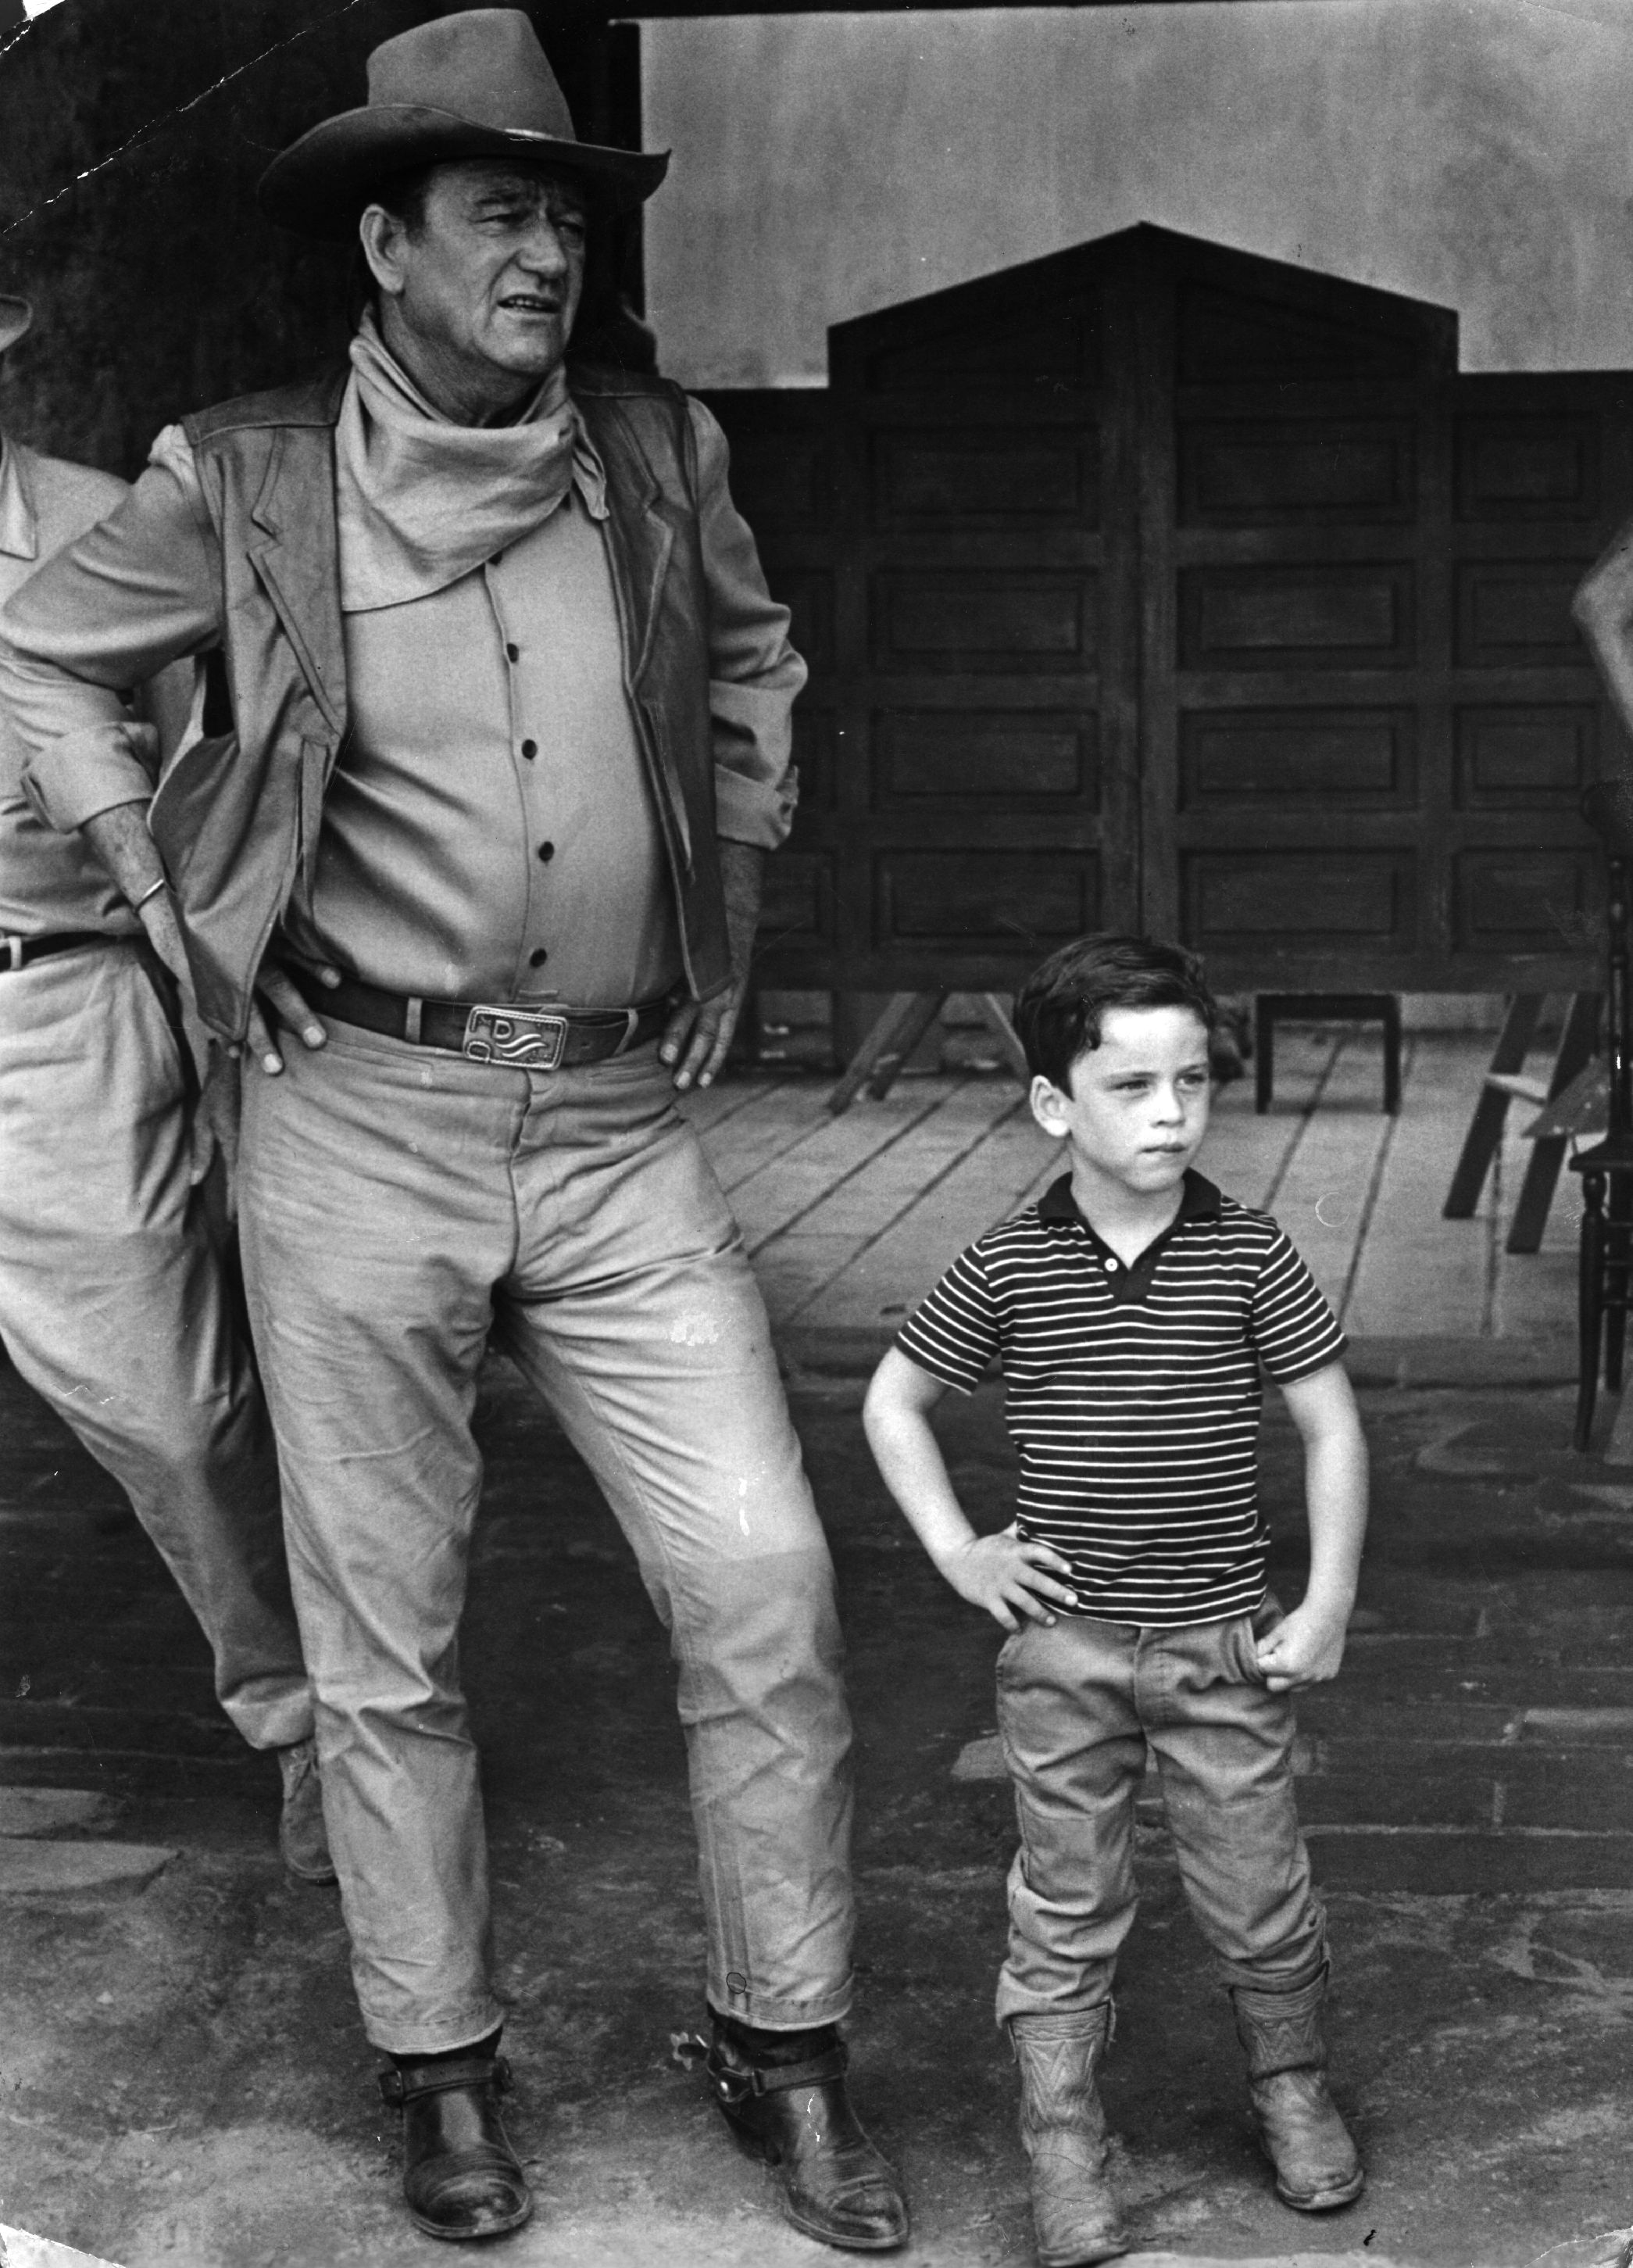 1967: The American film star, John Wayne, with his son, on location in Mexico for the filming of 'War Wagon | Photo: GettyImages